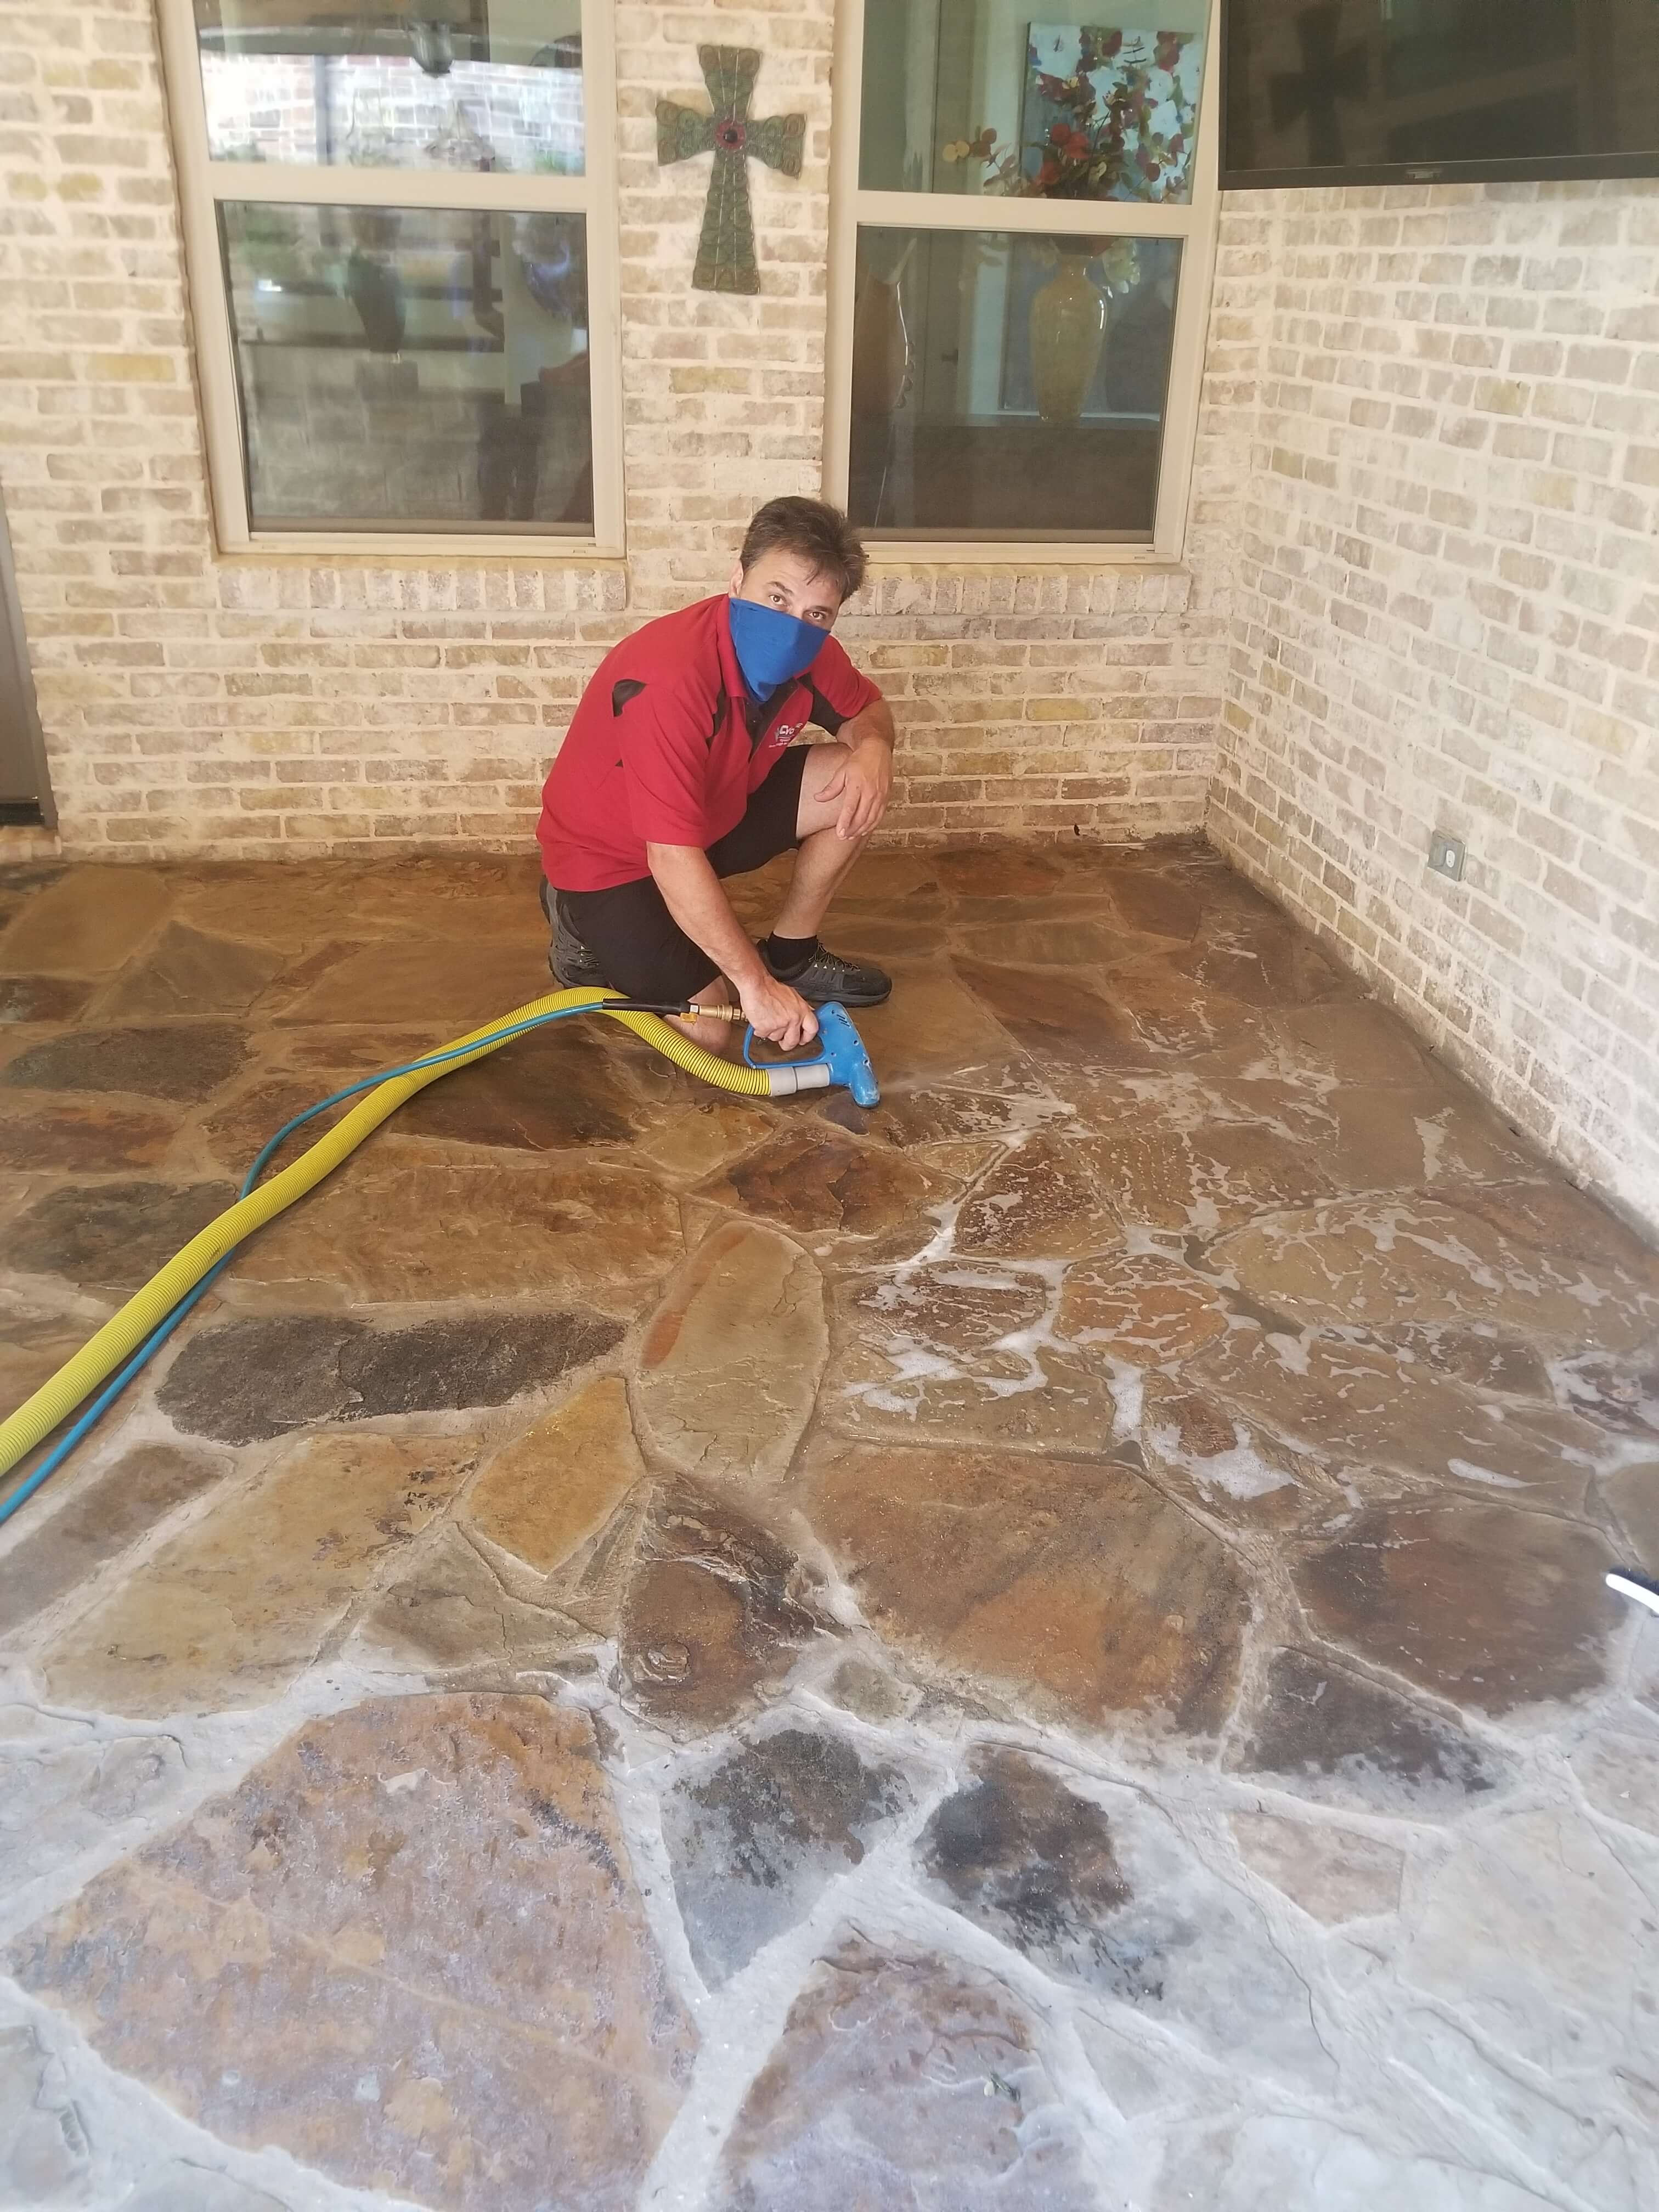 Wearing a mask while cleaning and sealing an outdoor marble floor